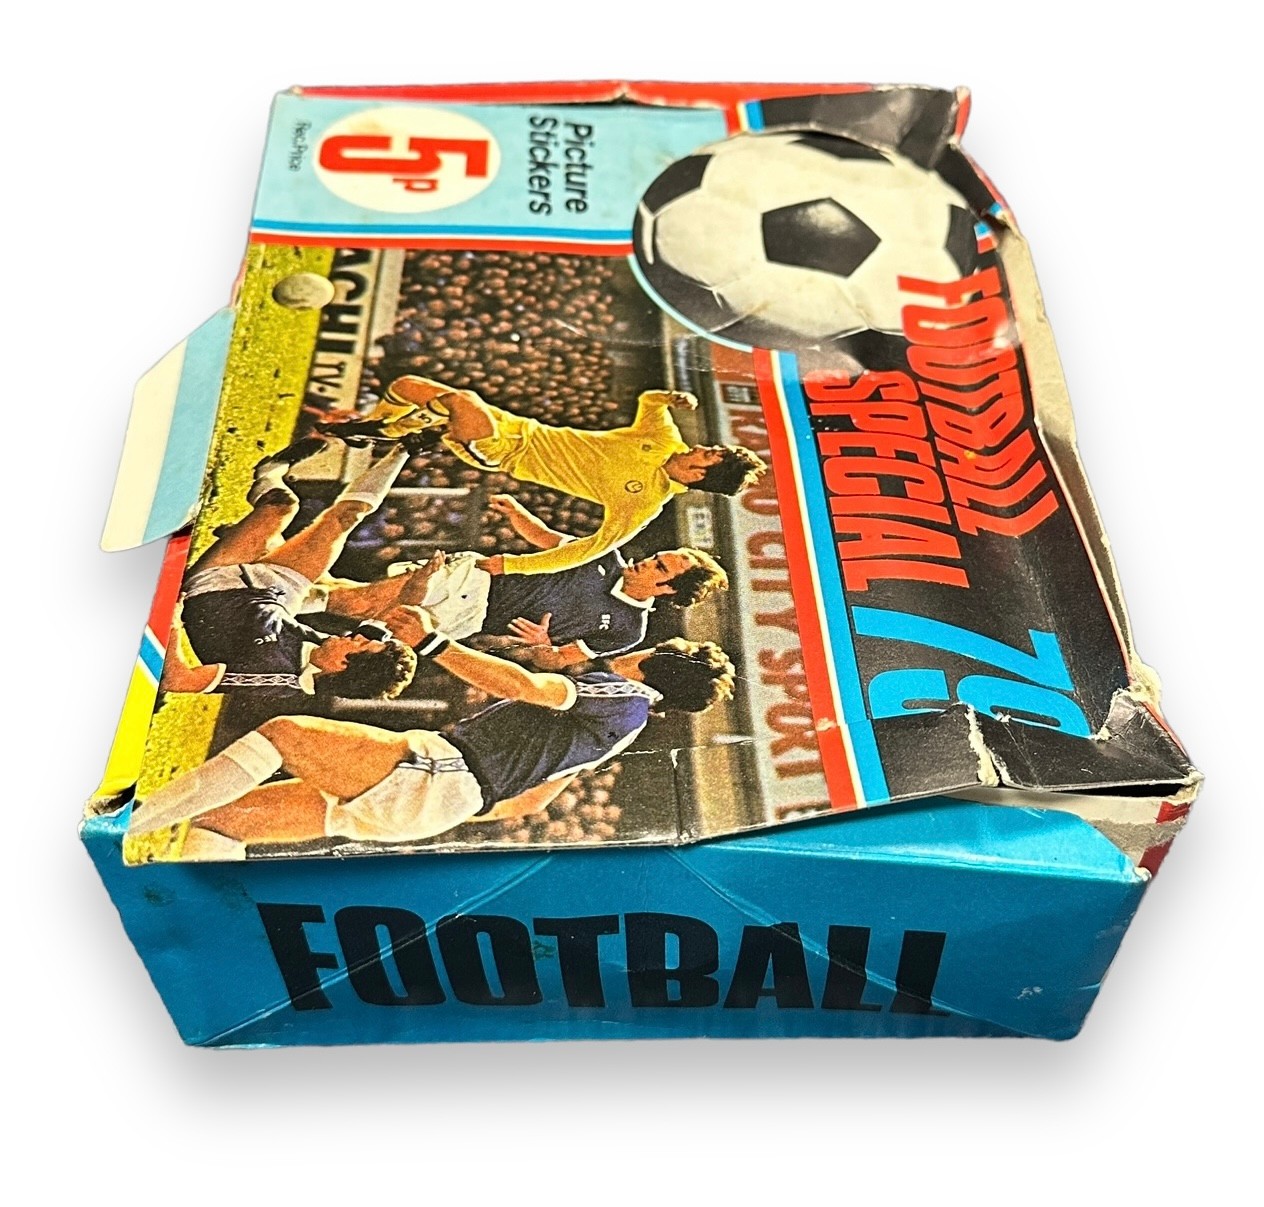 Trade stickers, Americana, 'Football Special 79', Counter Display Box containing approx. 200 packets - Image 3 of 4